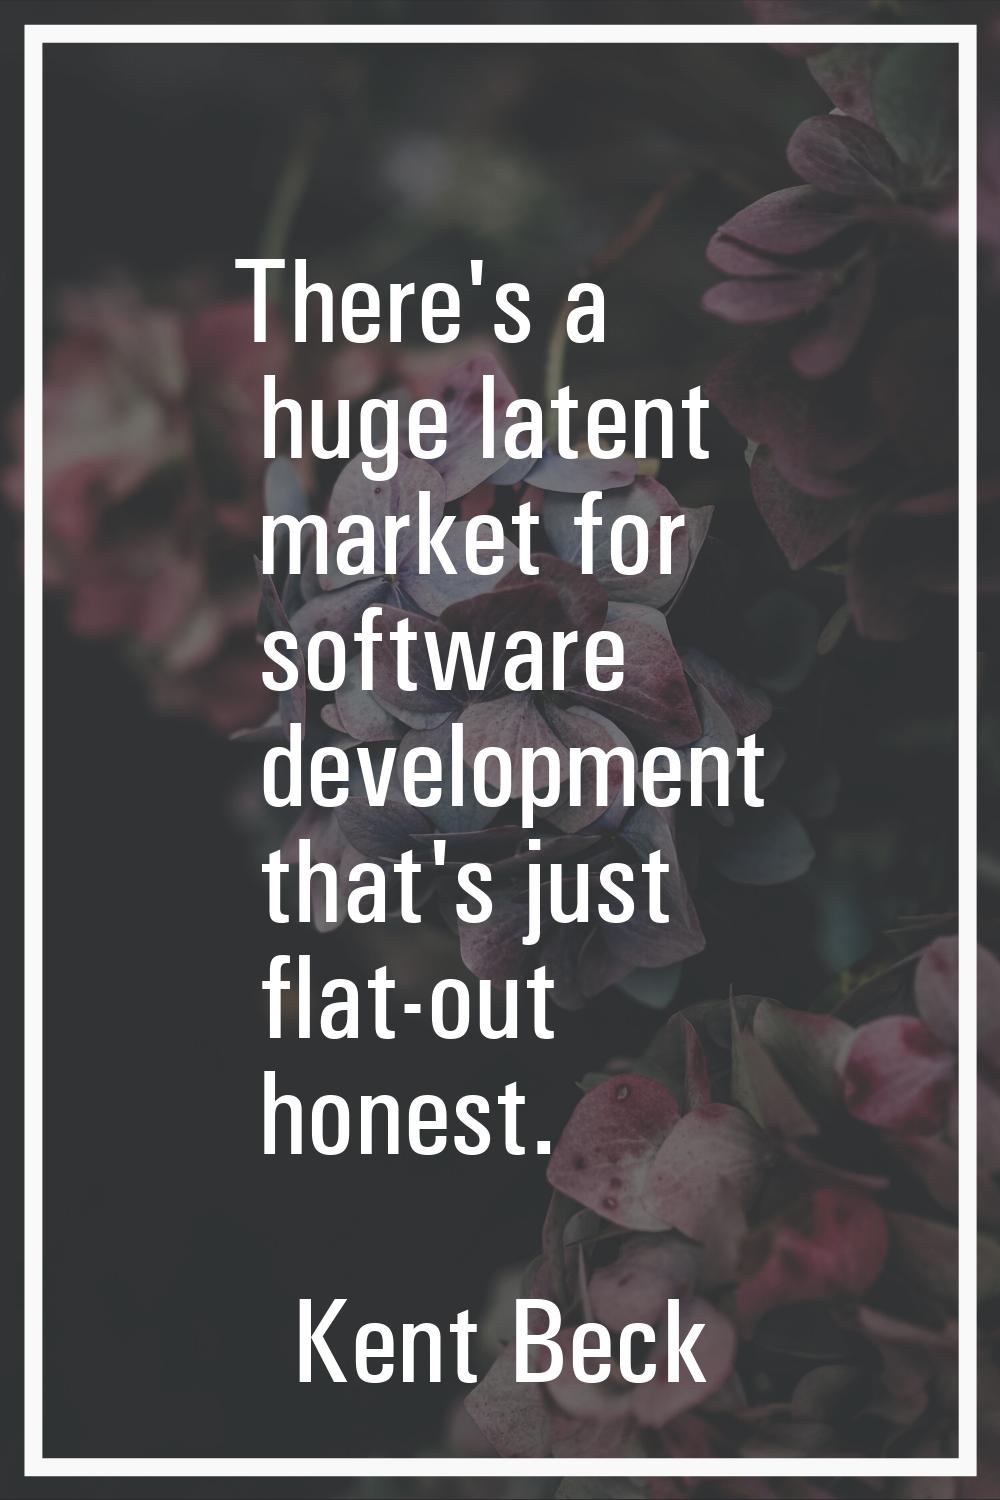 There's a huge latent market for software development that's just flat-out honest.